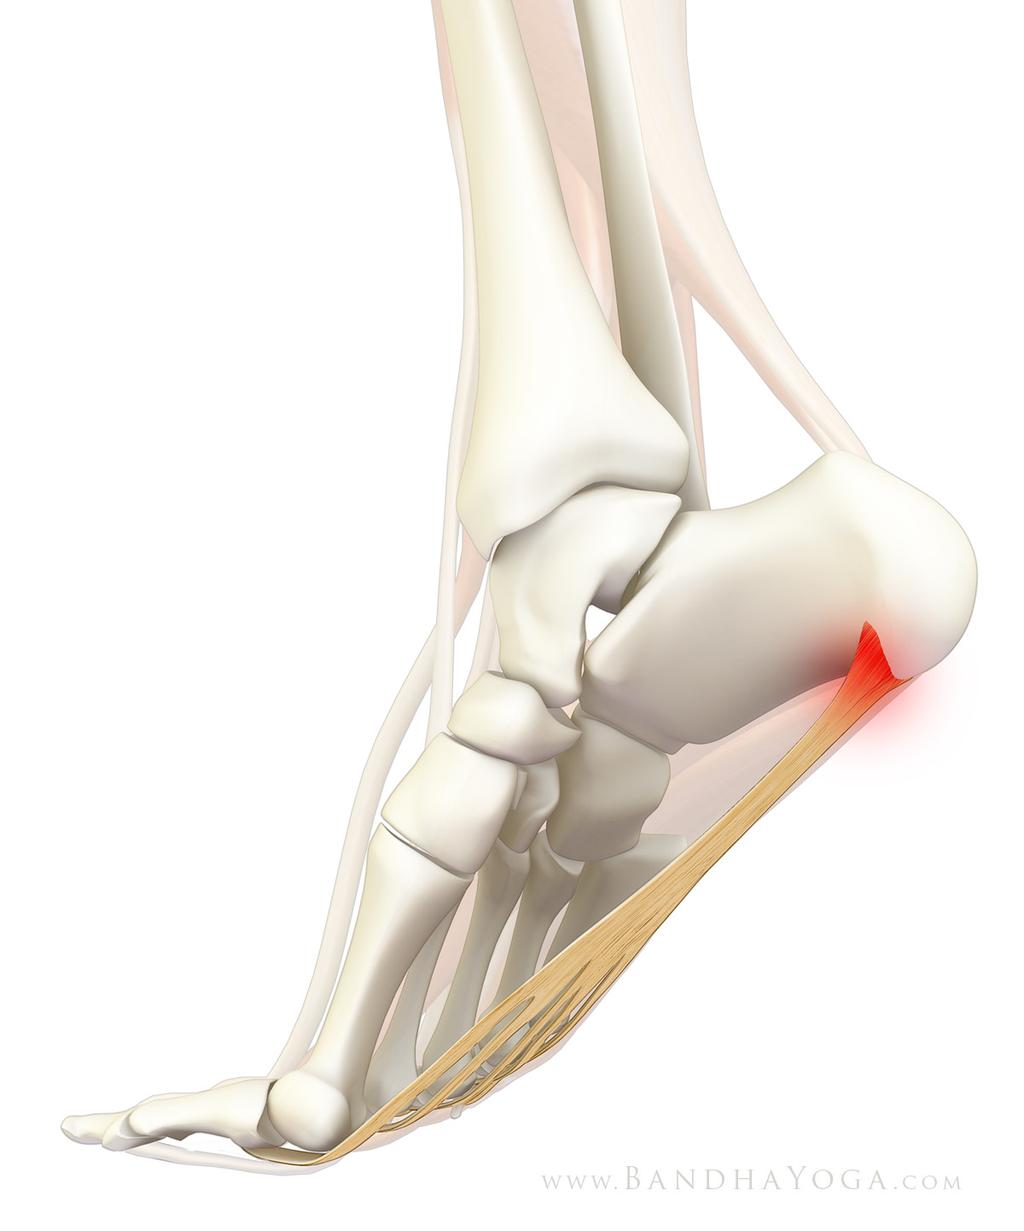 Figure 4: Plantar fasciitis (note the inflammation at the origin of the plantar aponeurosis). Note that there are other conditions that can cause heel pain.